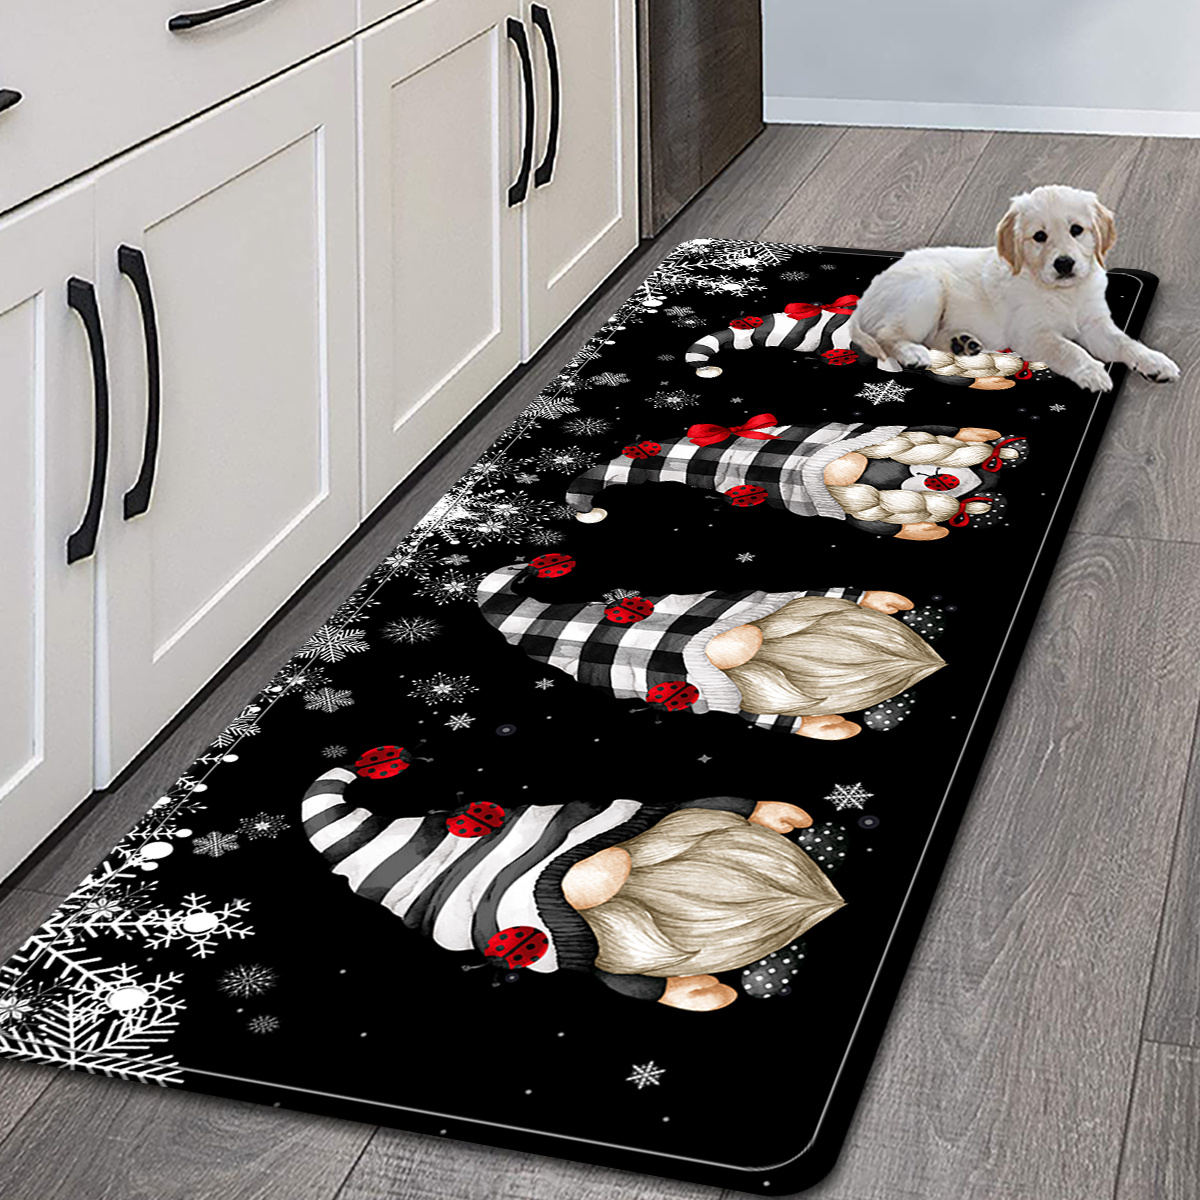 Non Slip Rubber Pack Floor/Kitchen Mats with Christmas Themes